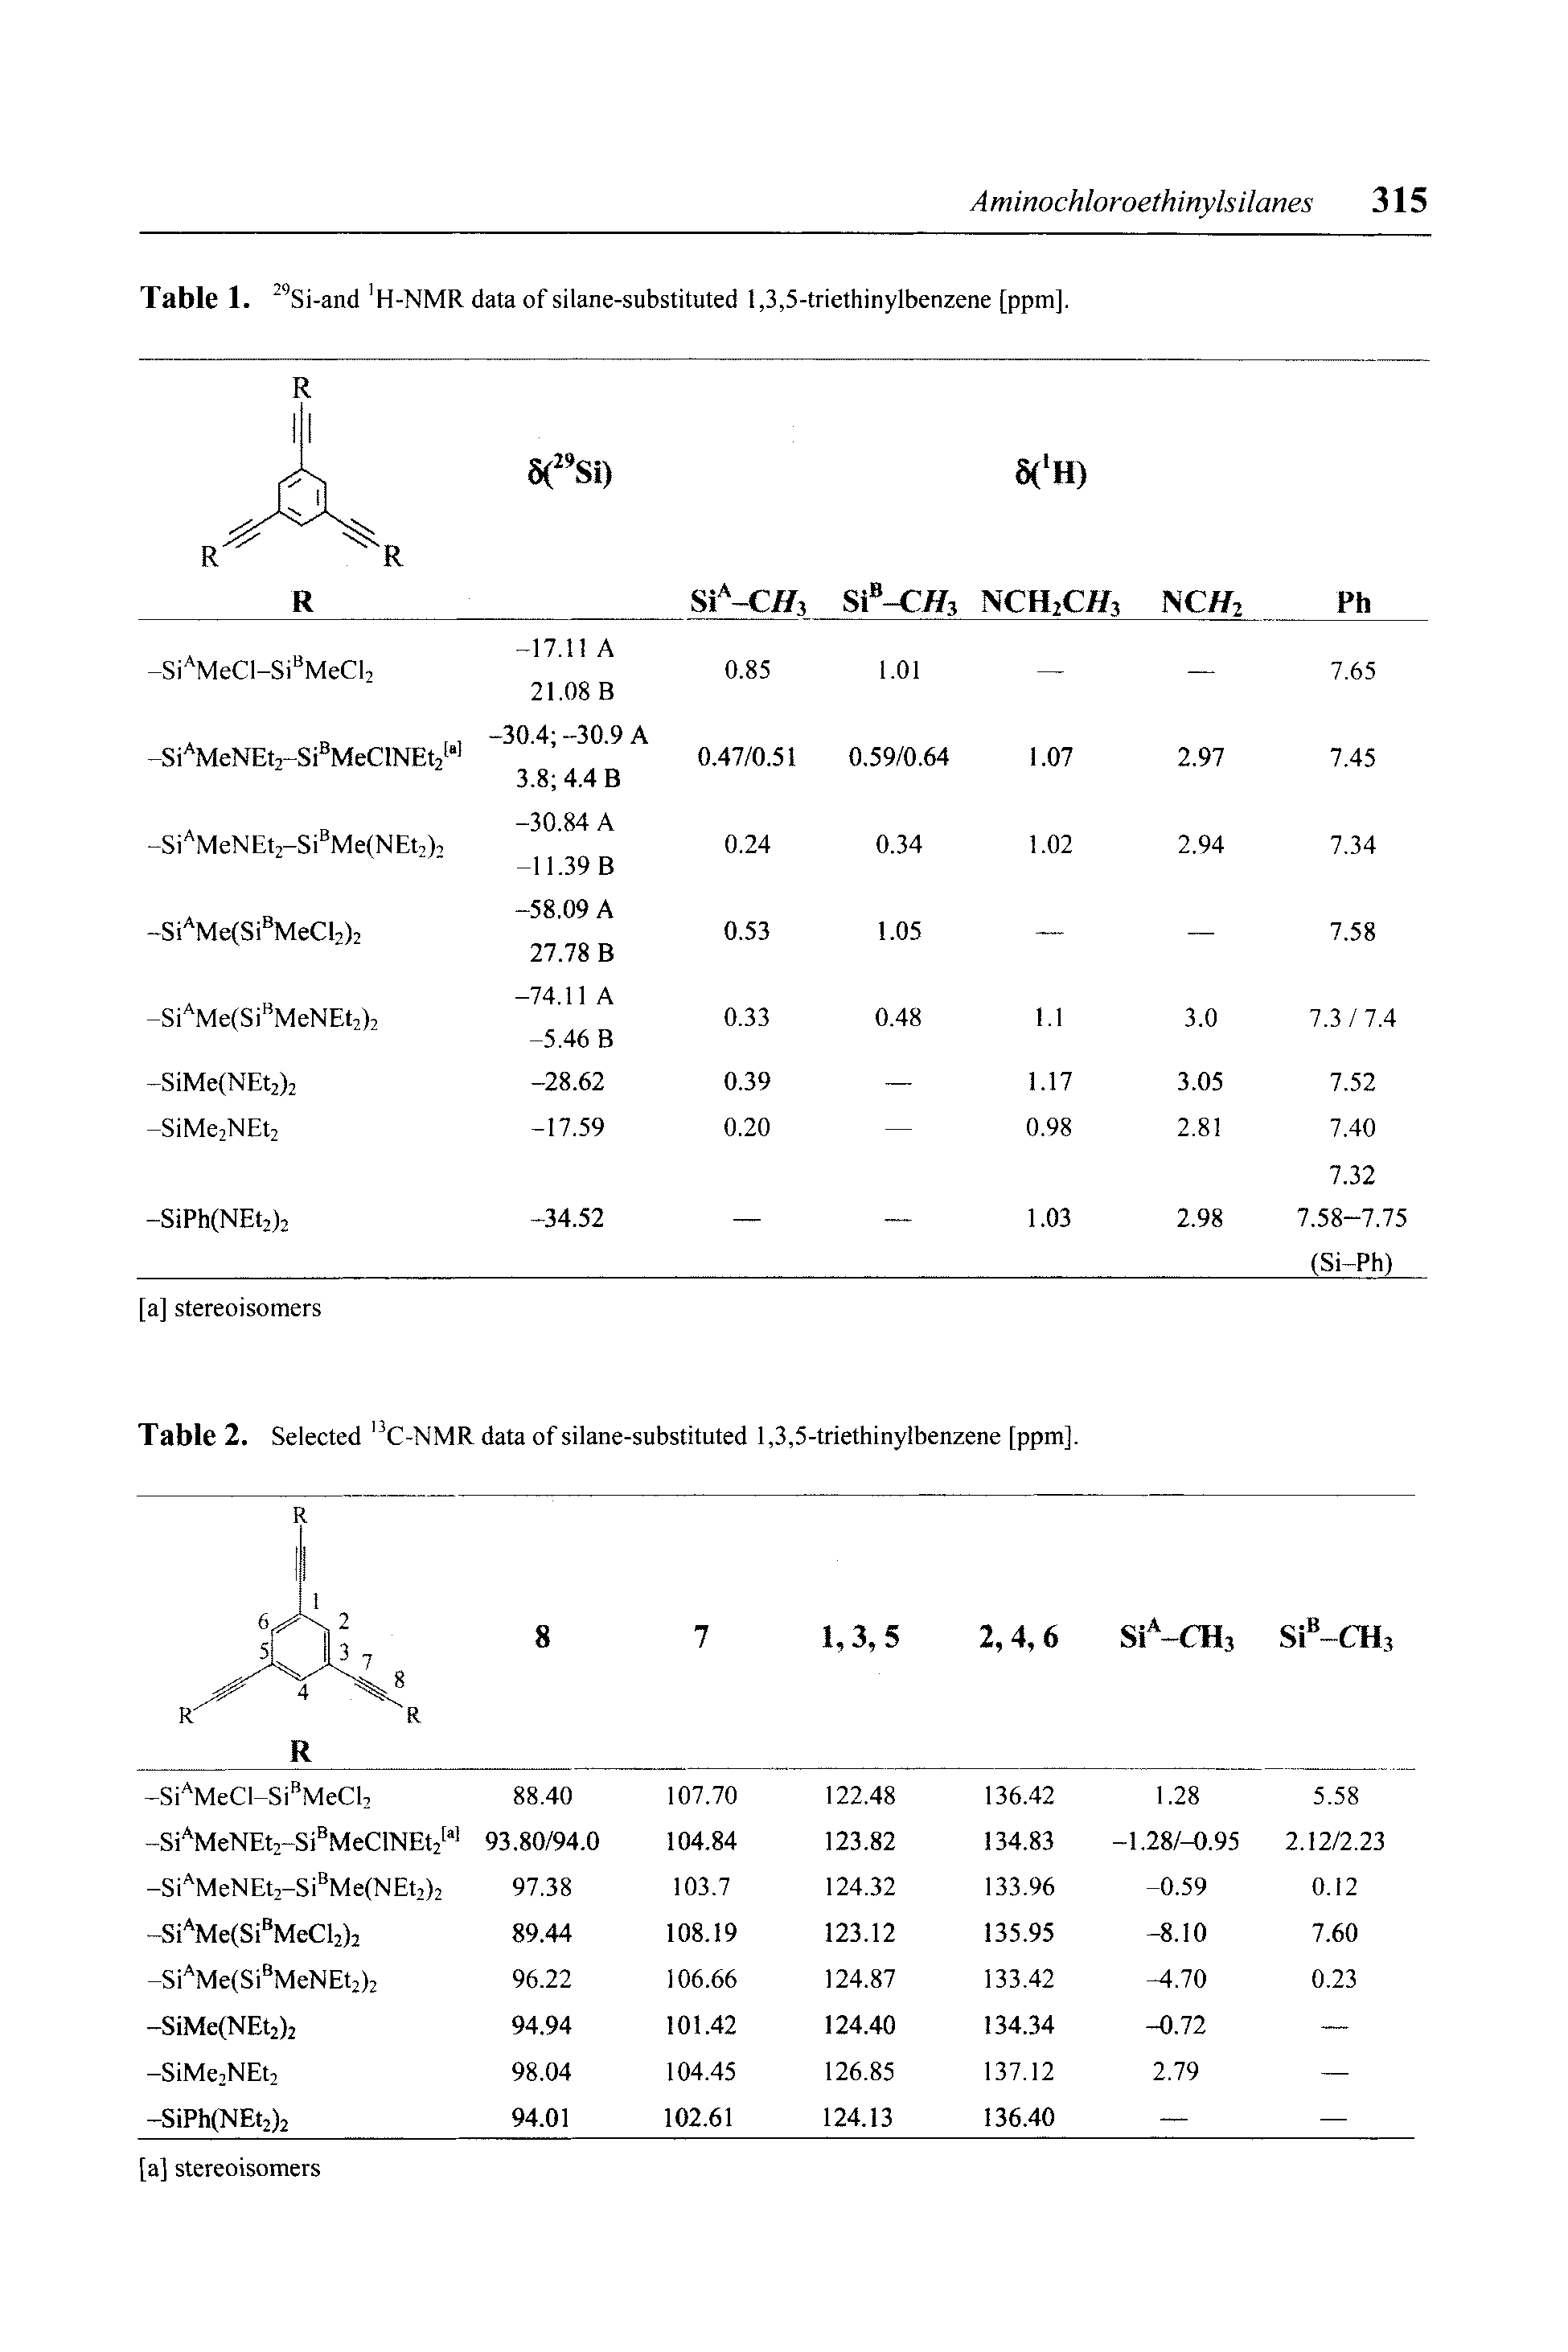 Table 2. Selected C-NMR data of silane-substituted 1,3,5-triethinylbenzene [ppm]. ...